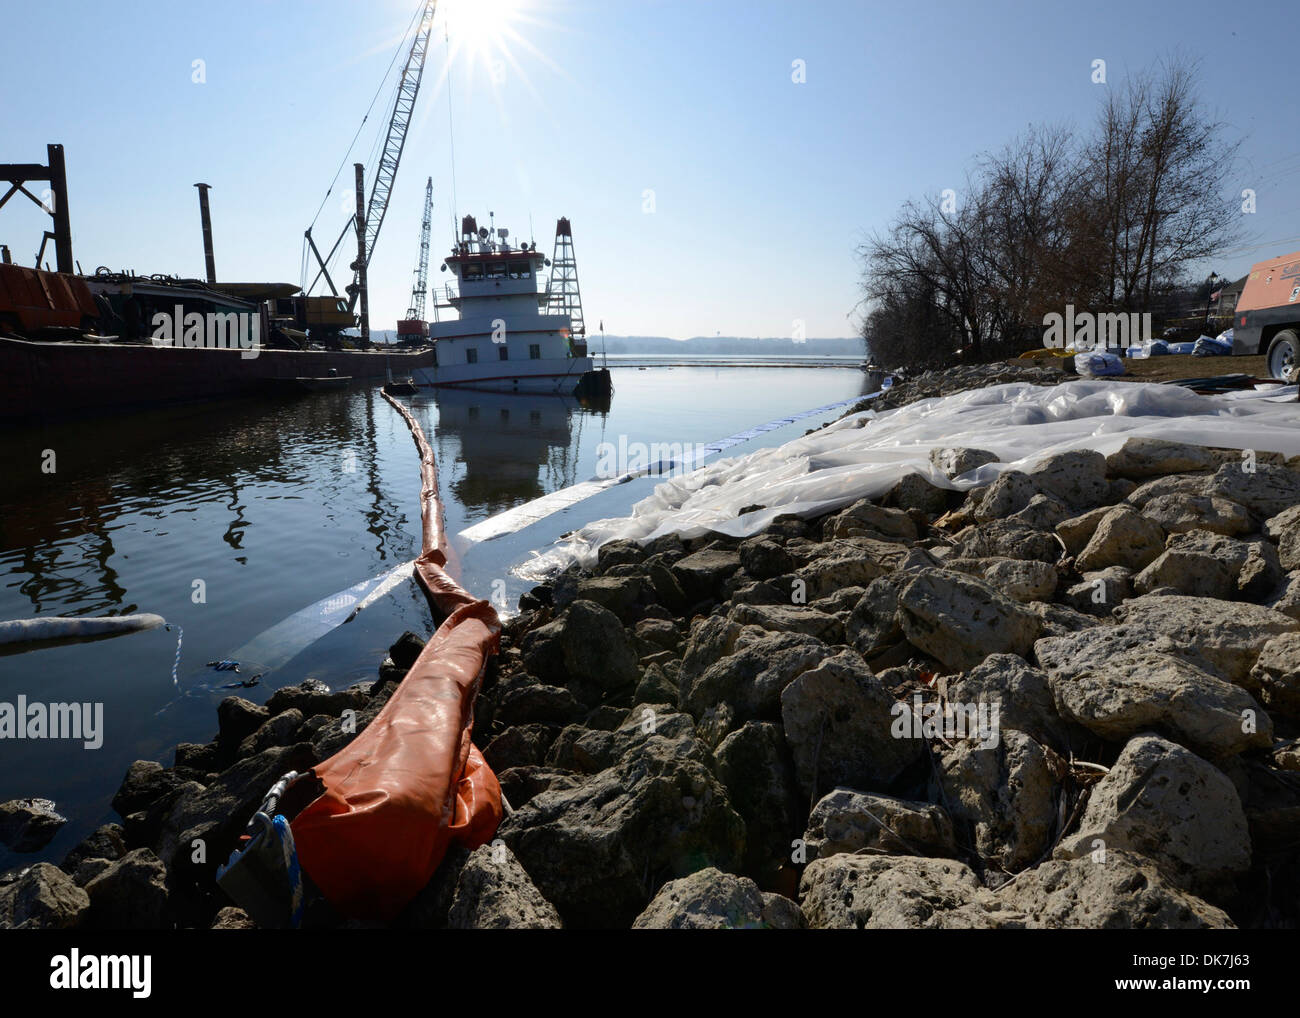 LECLAIRE, Iowa - The towboat Stephen L. Colby sits boomed off on the right descending bank of the Mississippi River near downtown LeClaire while response crews conduct cleanup and salvage operations, Dec. 1, 2013. The Stephen L. Colby sank after hitting a Stock Photo